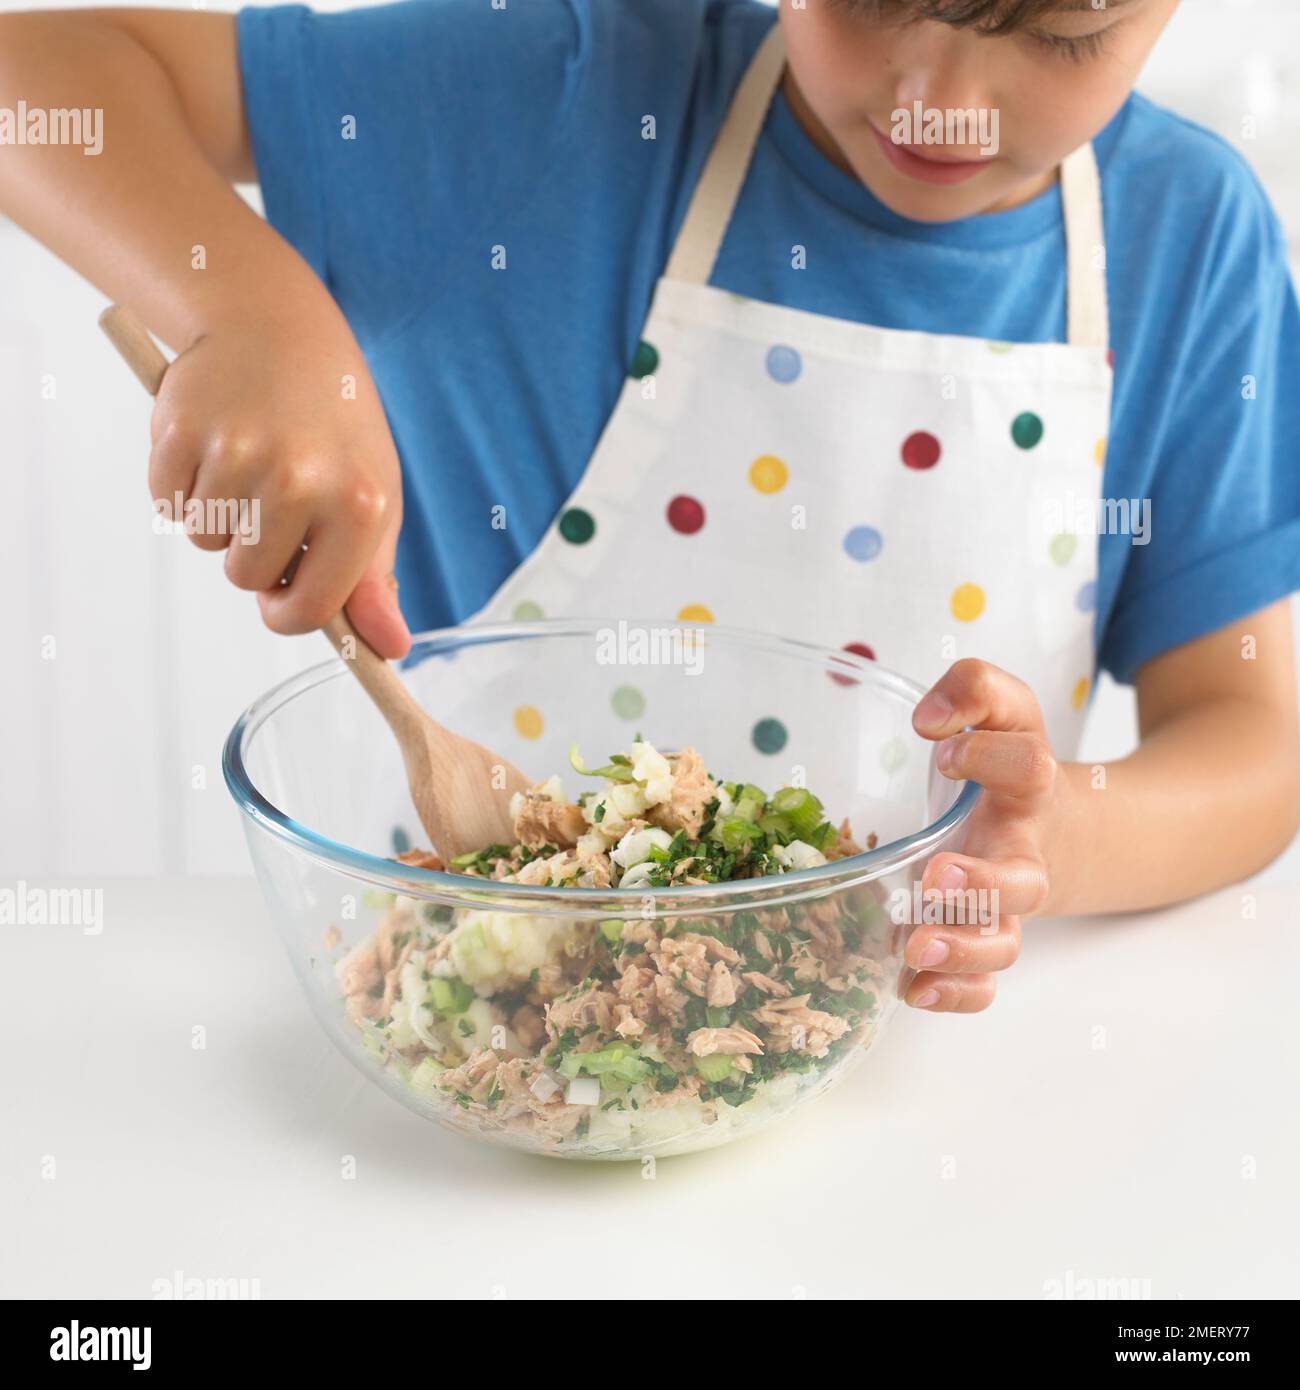 Making fishcakes, Boy mixing potato, fish and spring onion together, 7 years Stock Photo